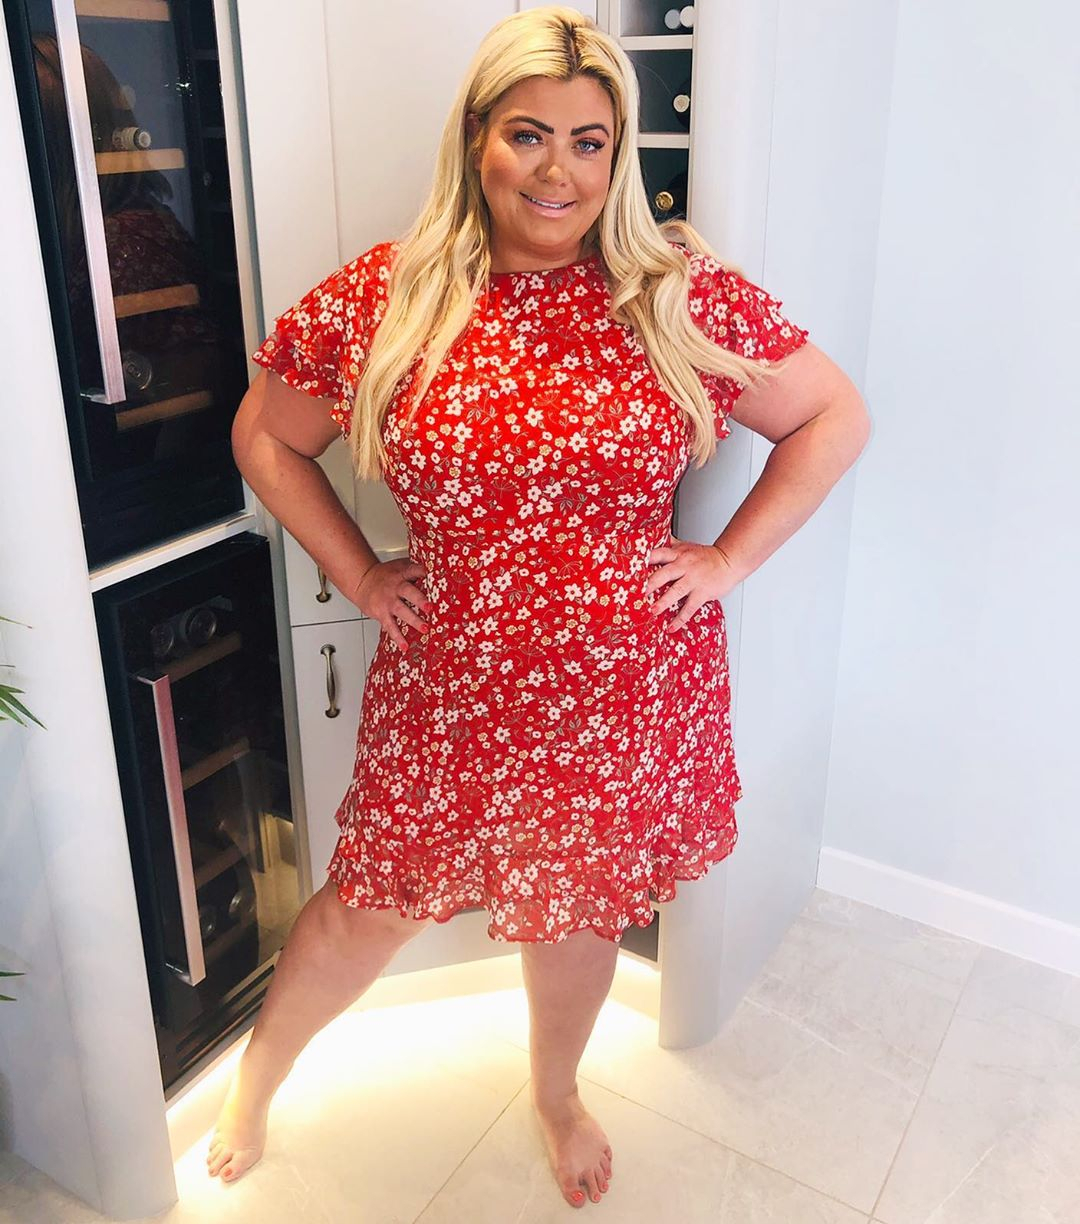 Her fans are loving the slimmed down Gemma and are crediting her for inspiring them